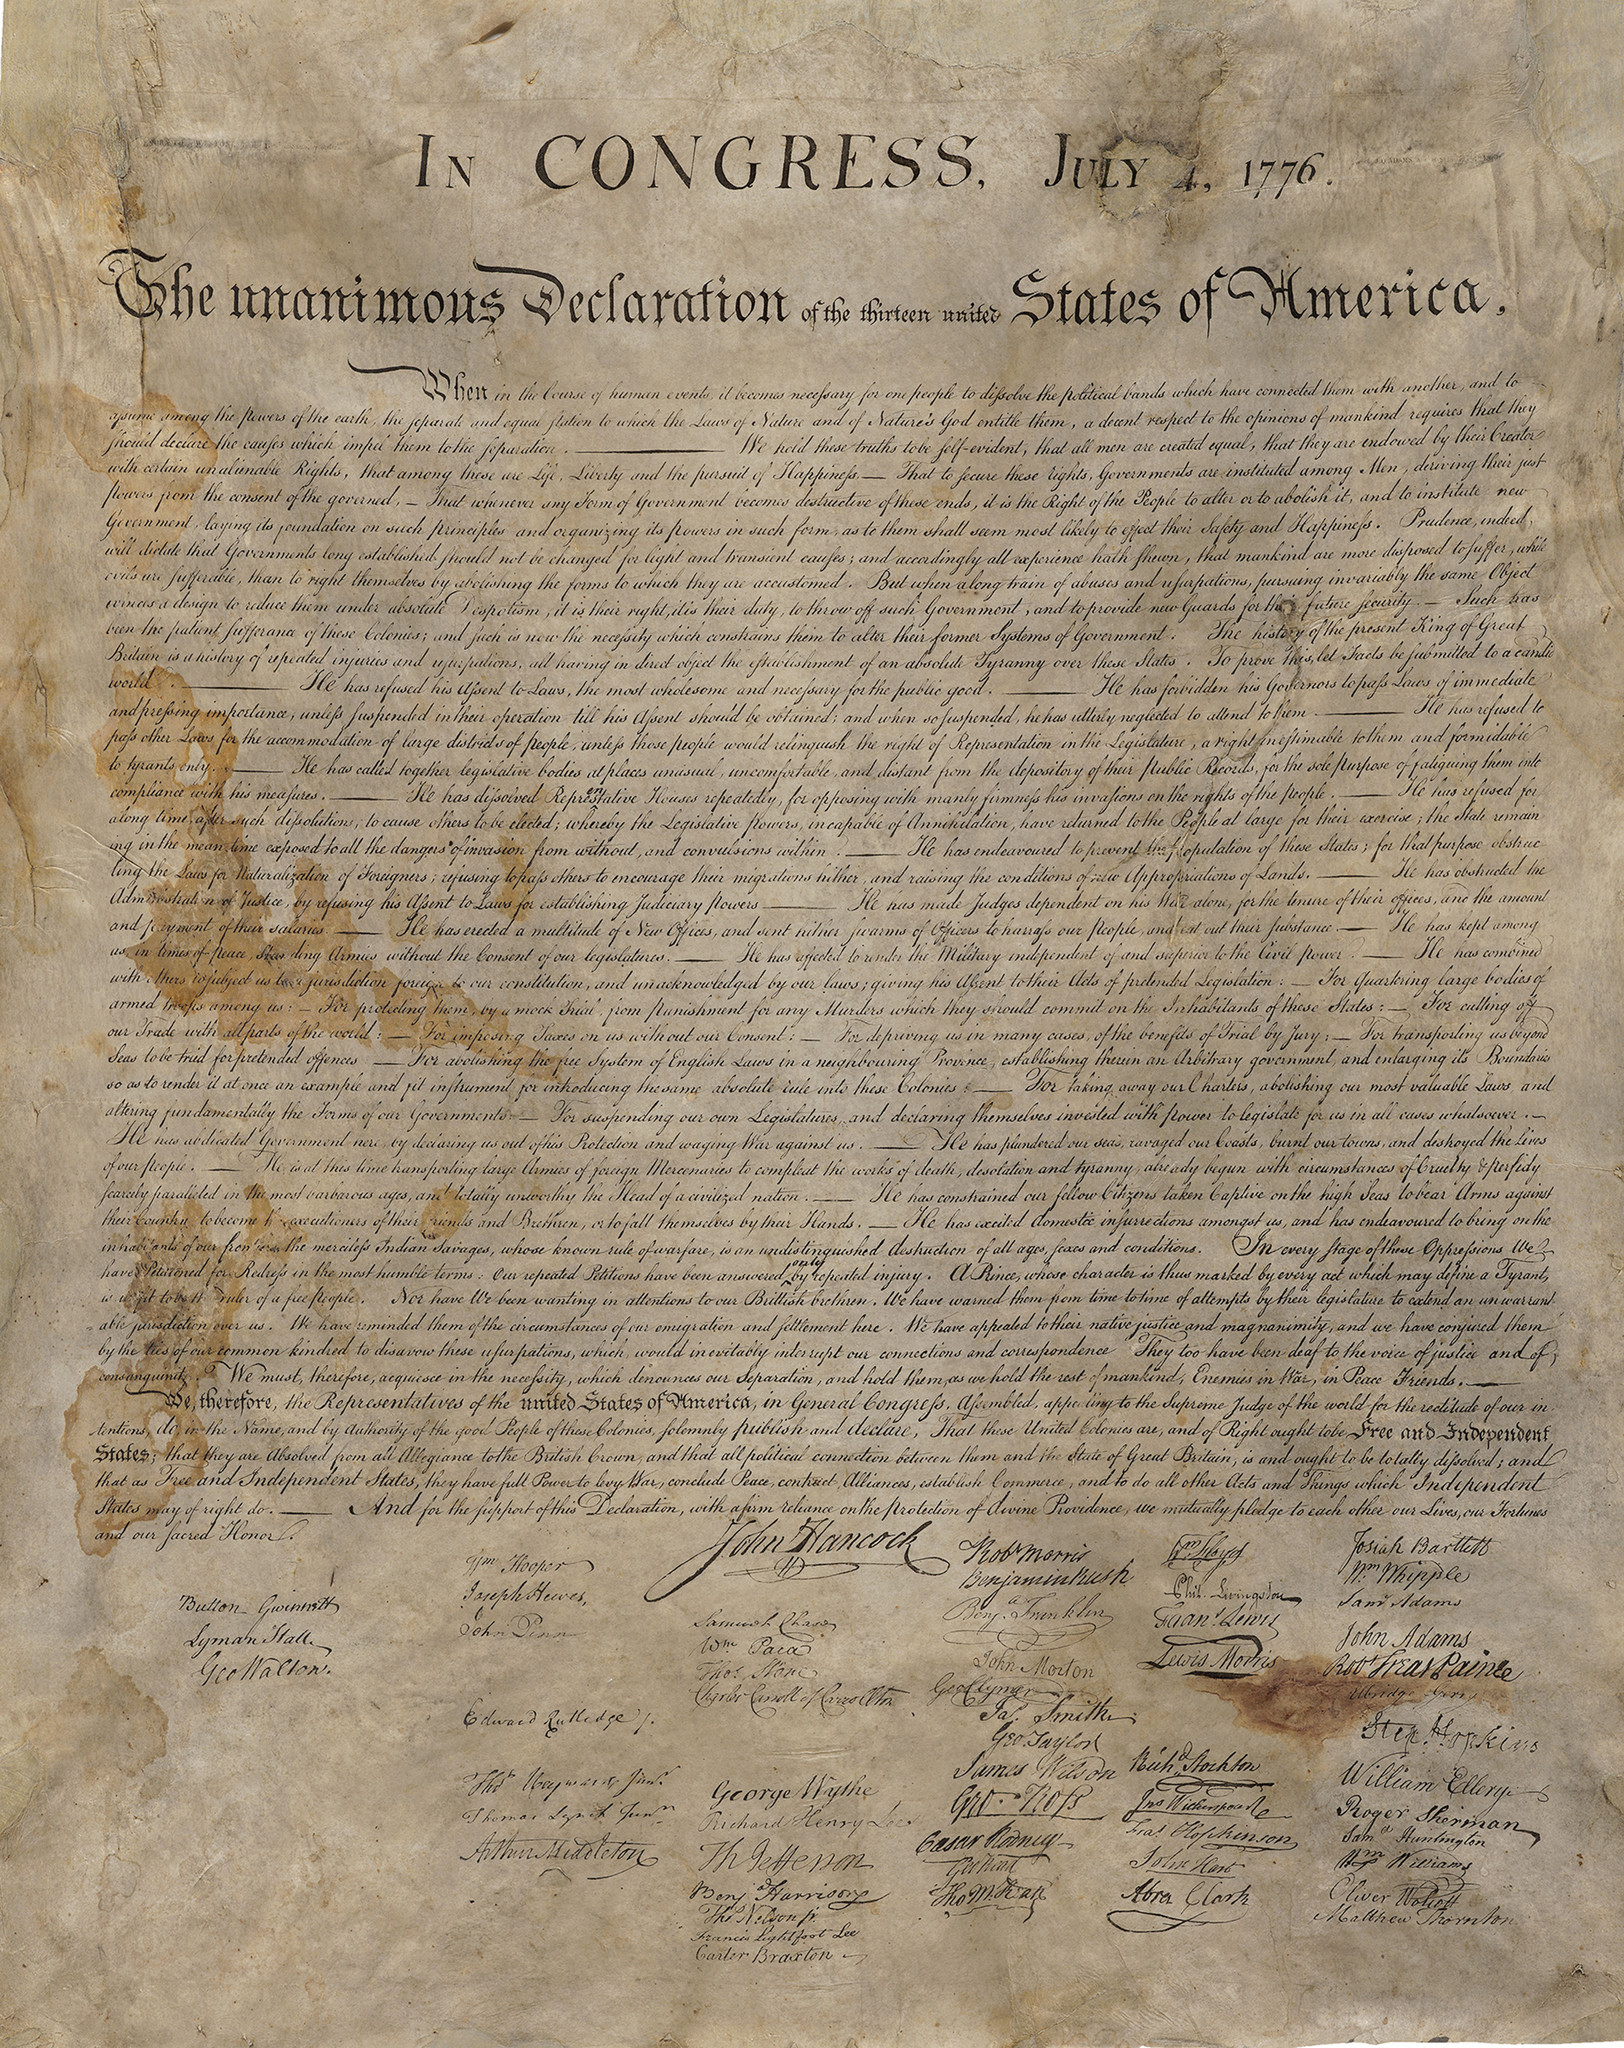 a-rare-copy-of-the-declaration-of-independence-survived-the-civil-war-hidden-behind-wallpaper